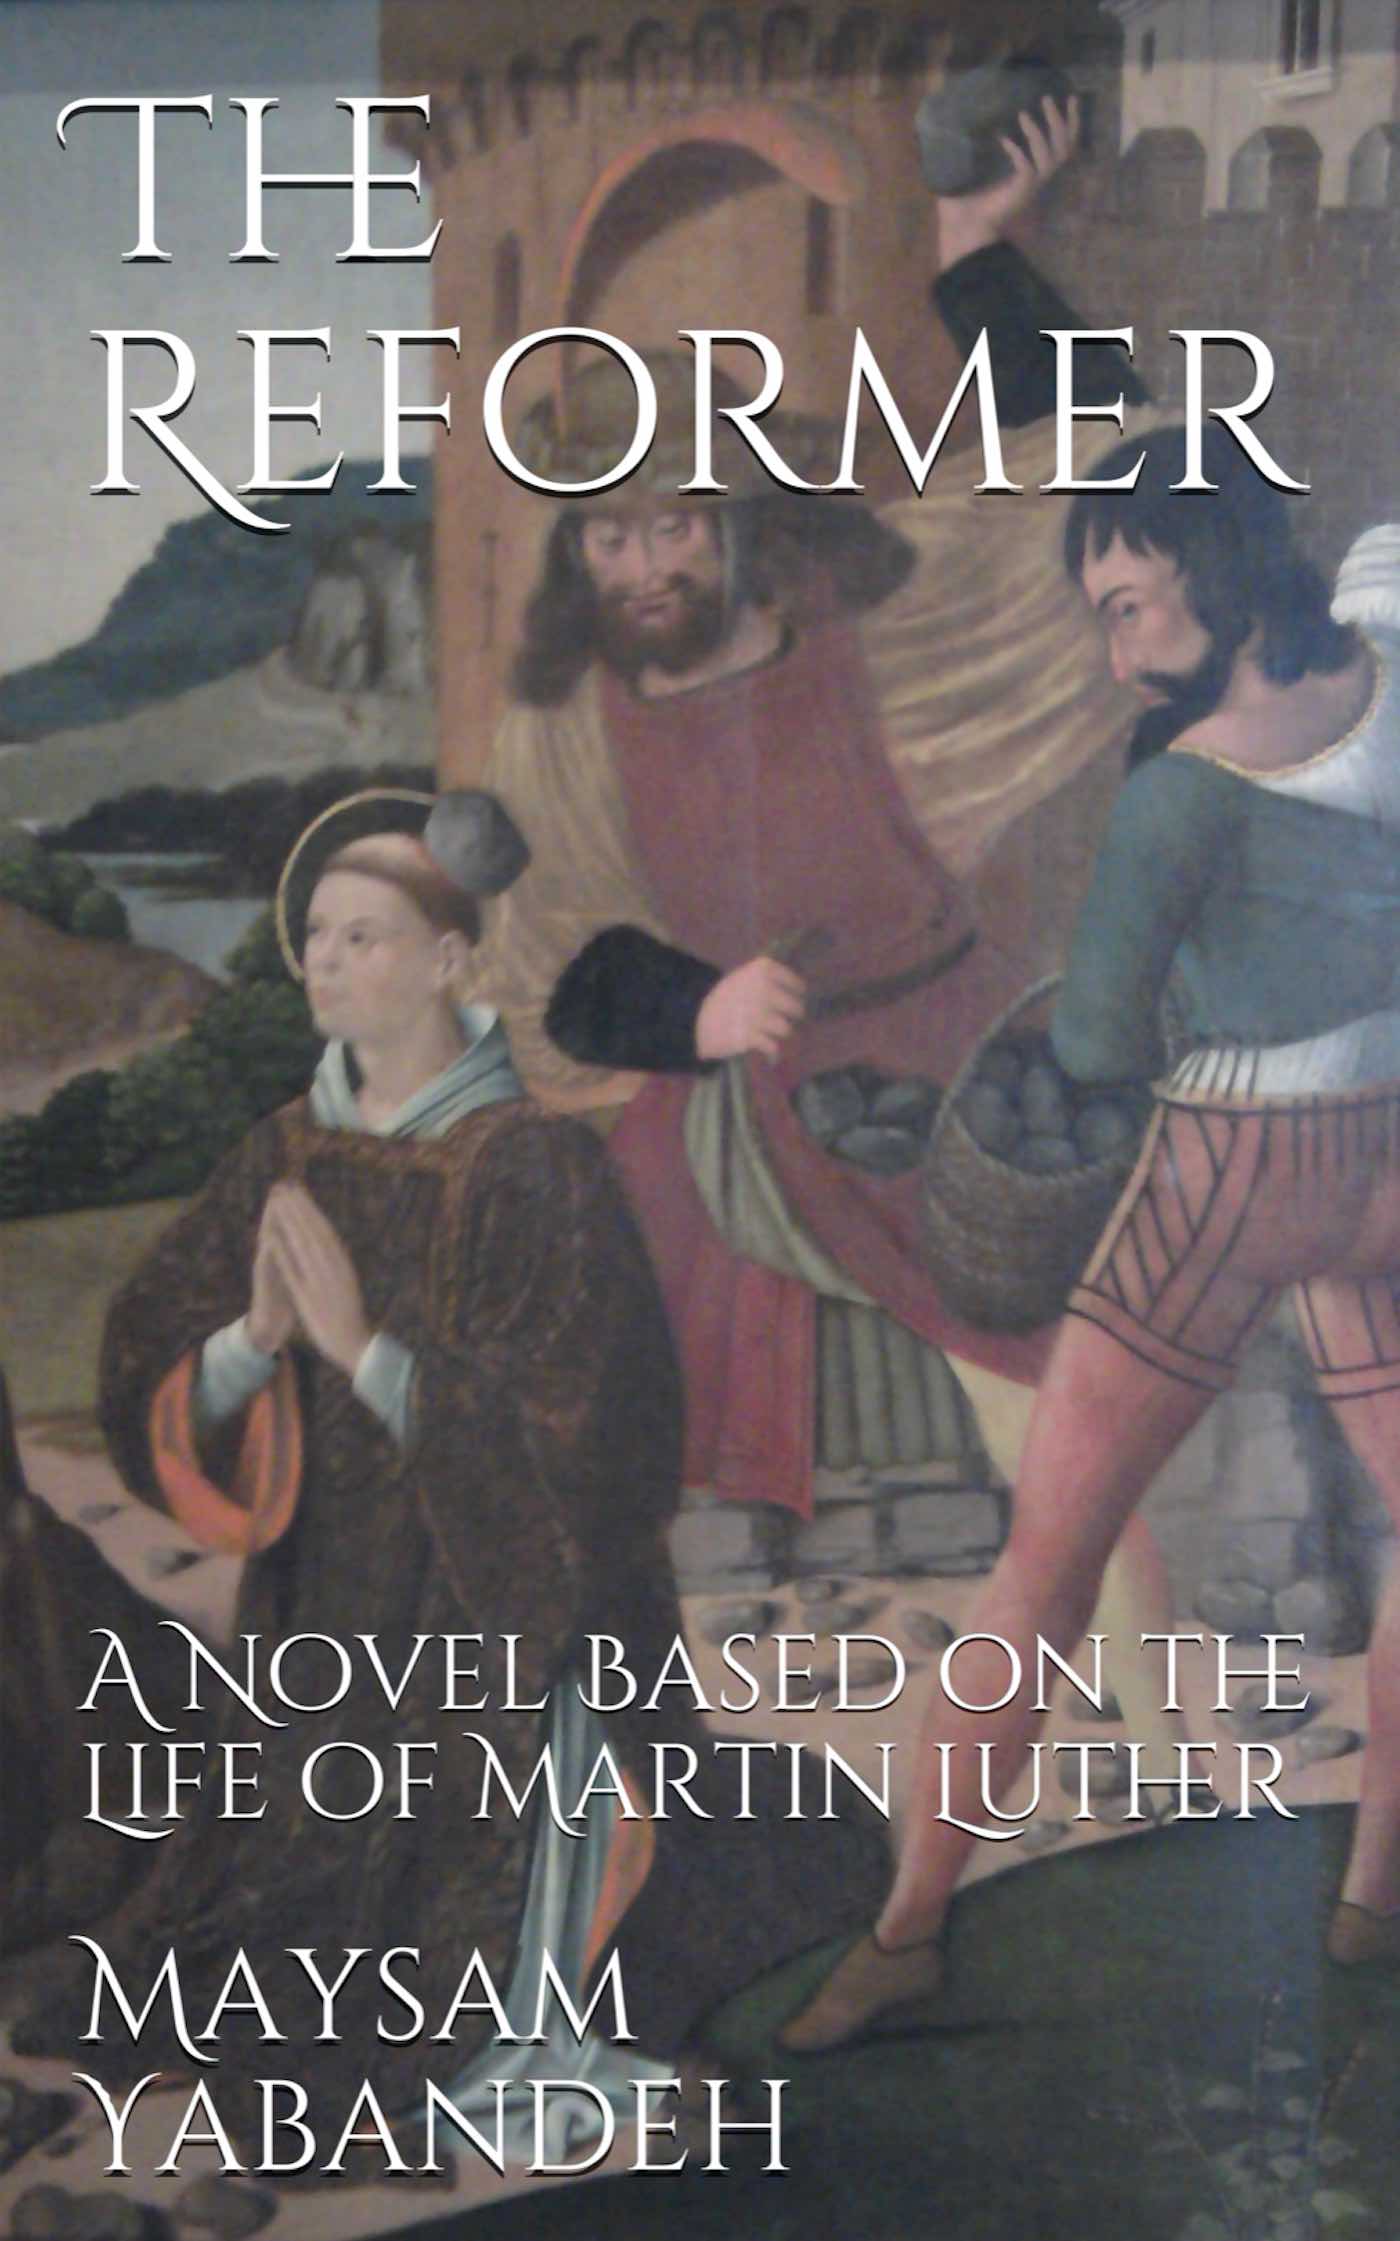 FREE: The Reformer: A Novel Based on the Life of Martin Luther by Maysam Yabandeh